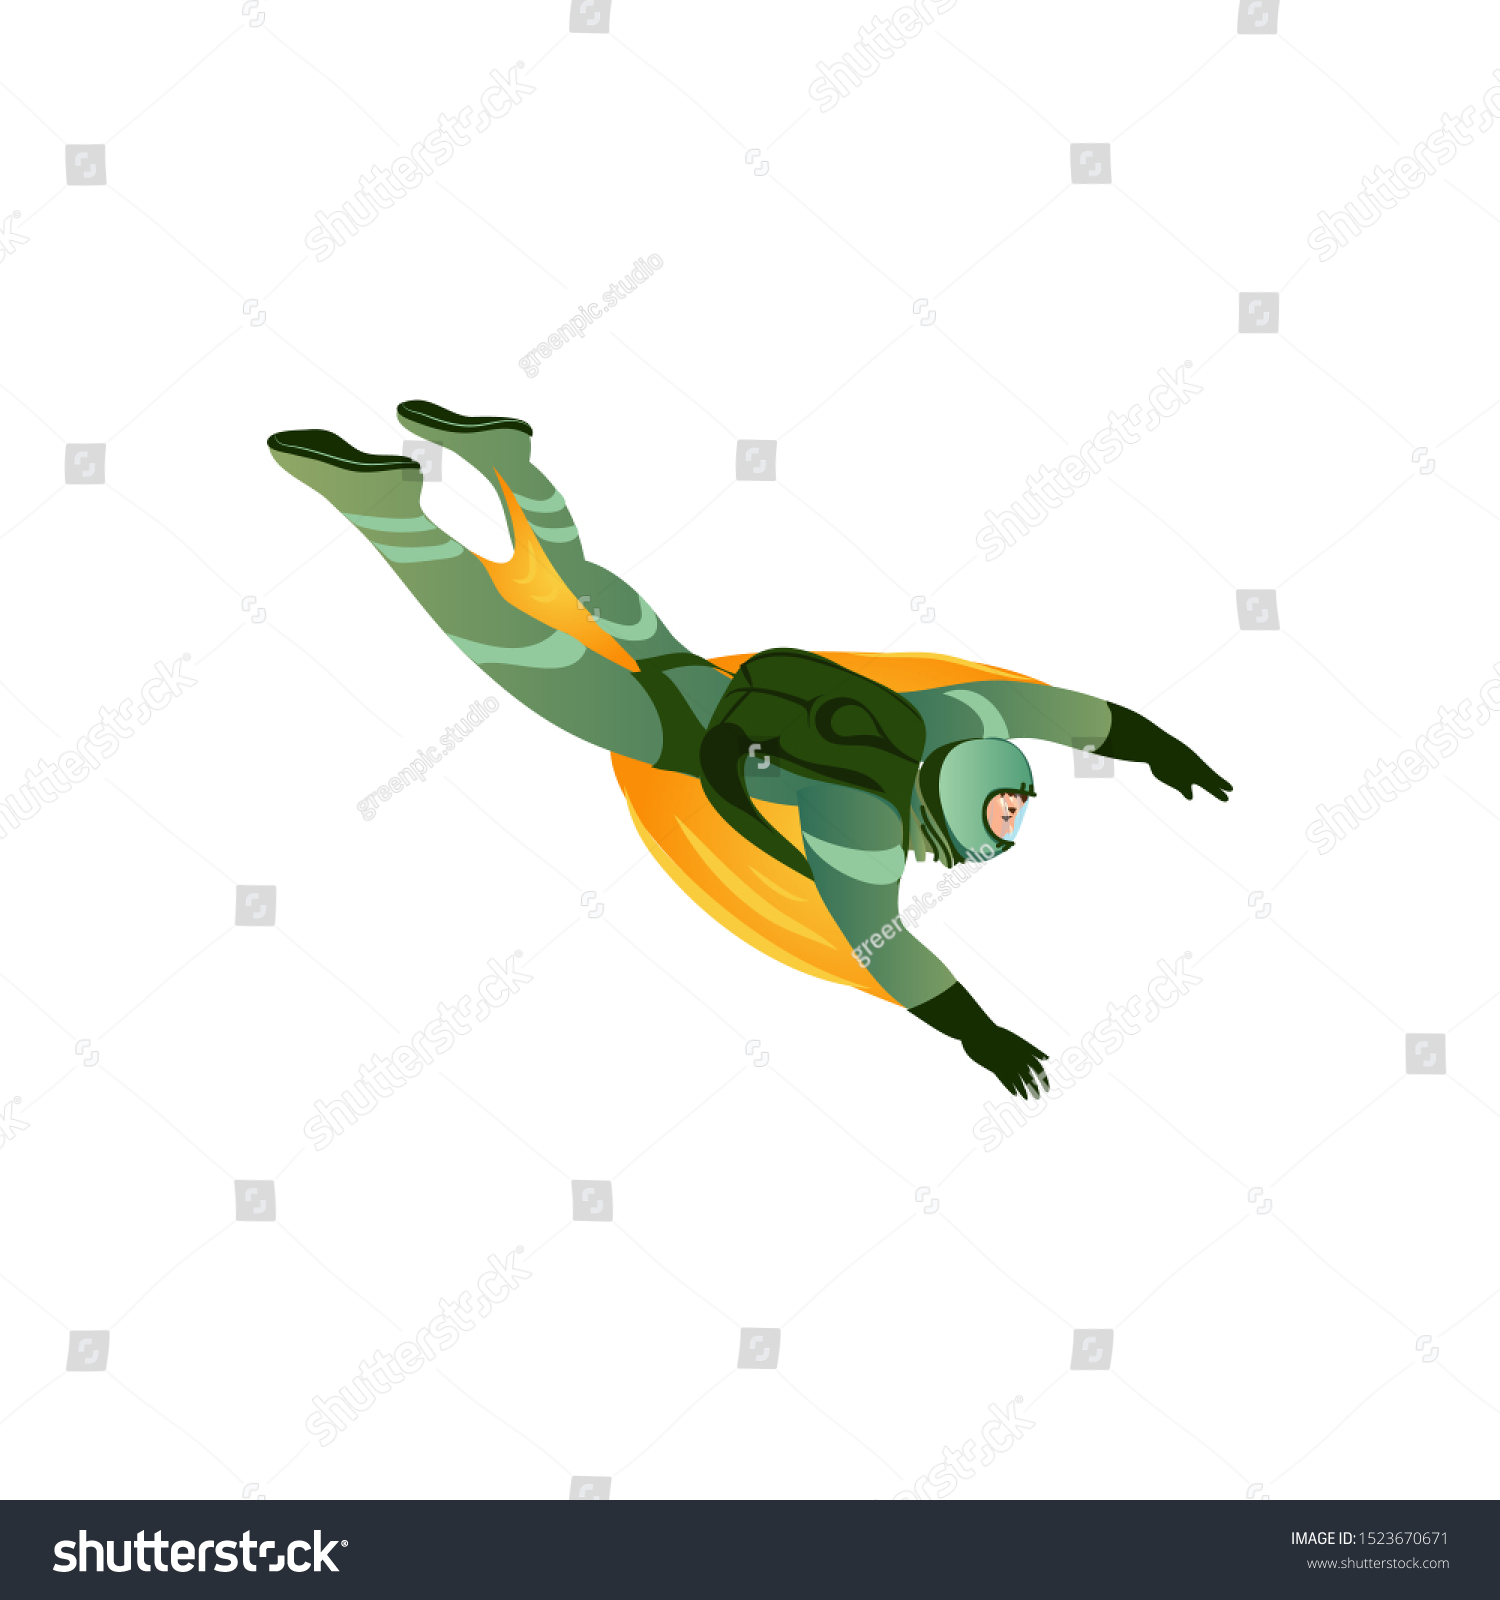 Wingsuit man flying through the air vector illustration in a flat cartoon style. #1523670671